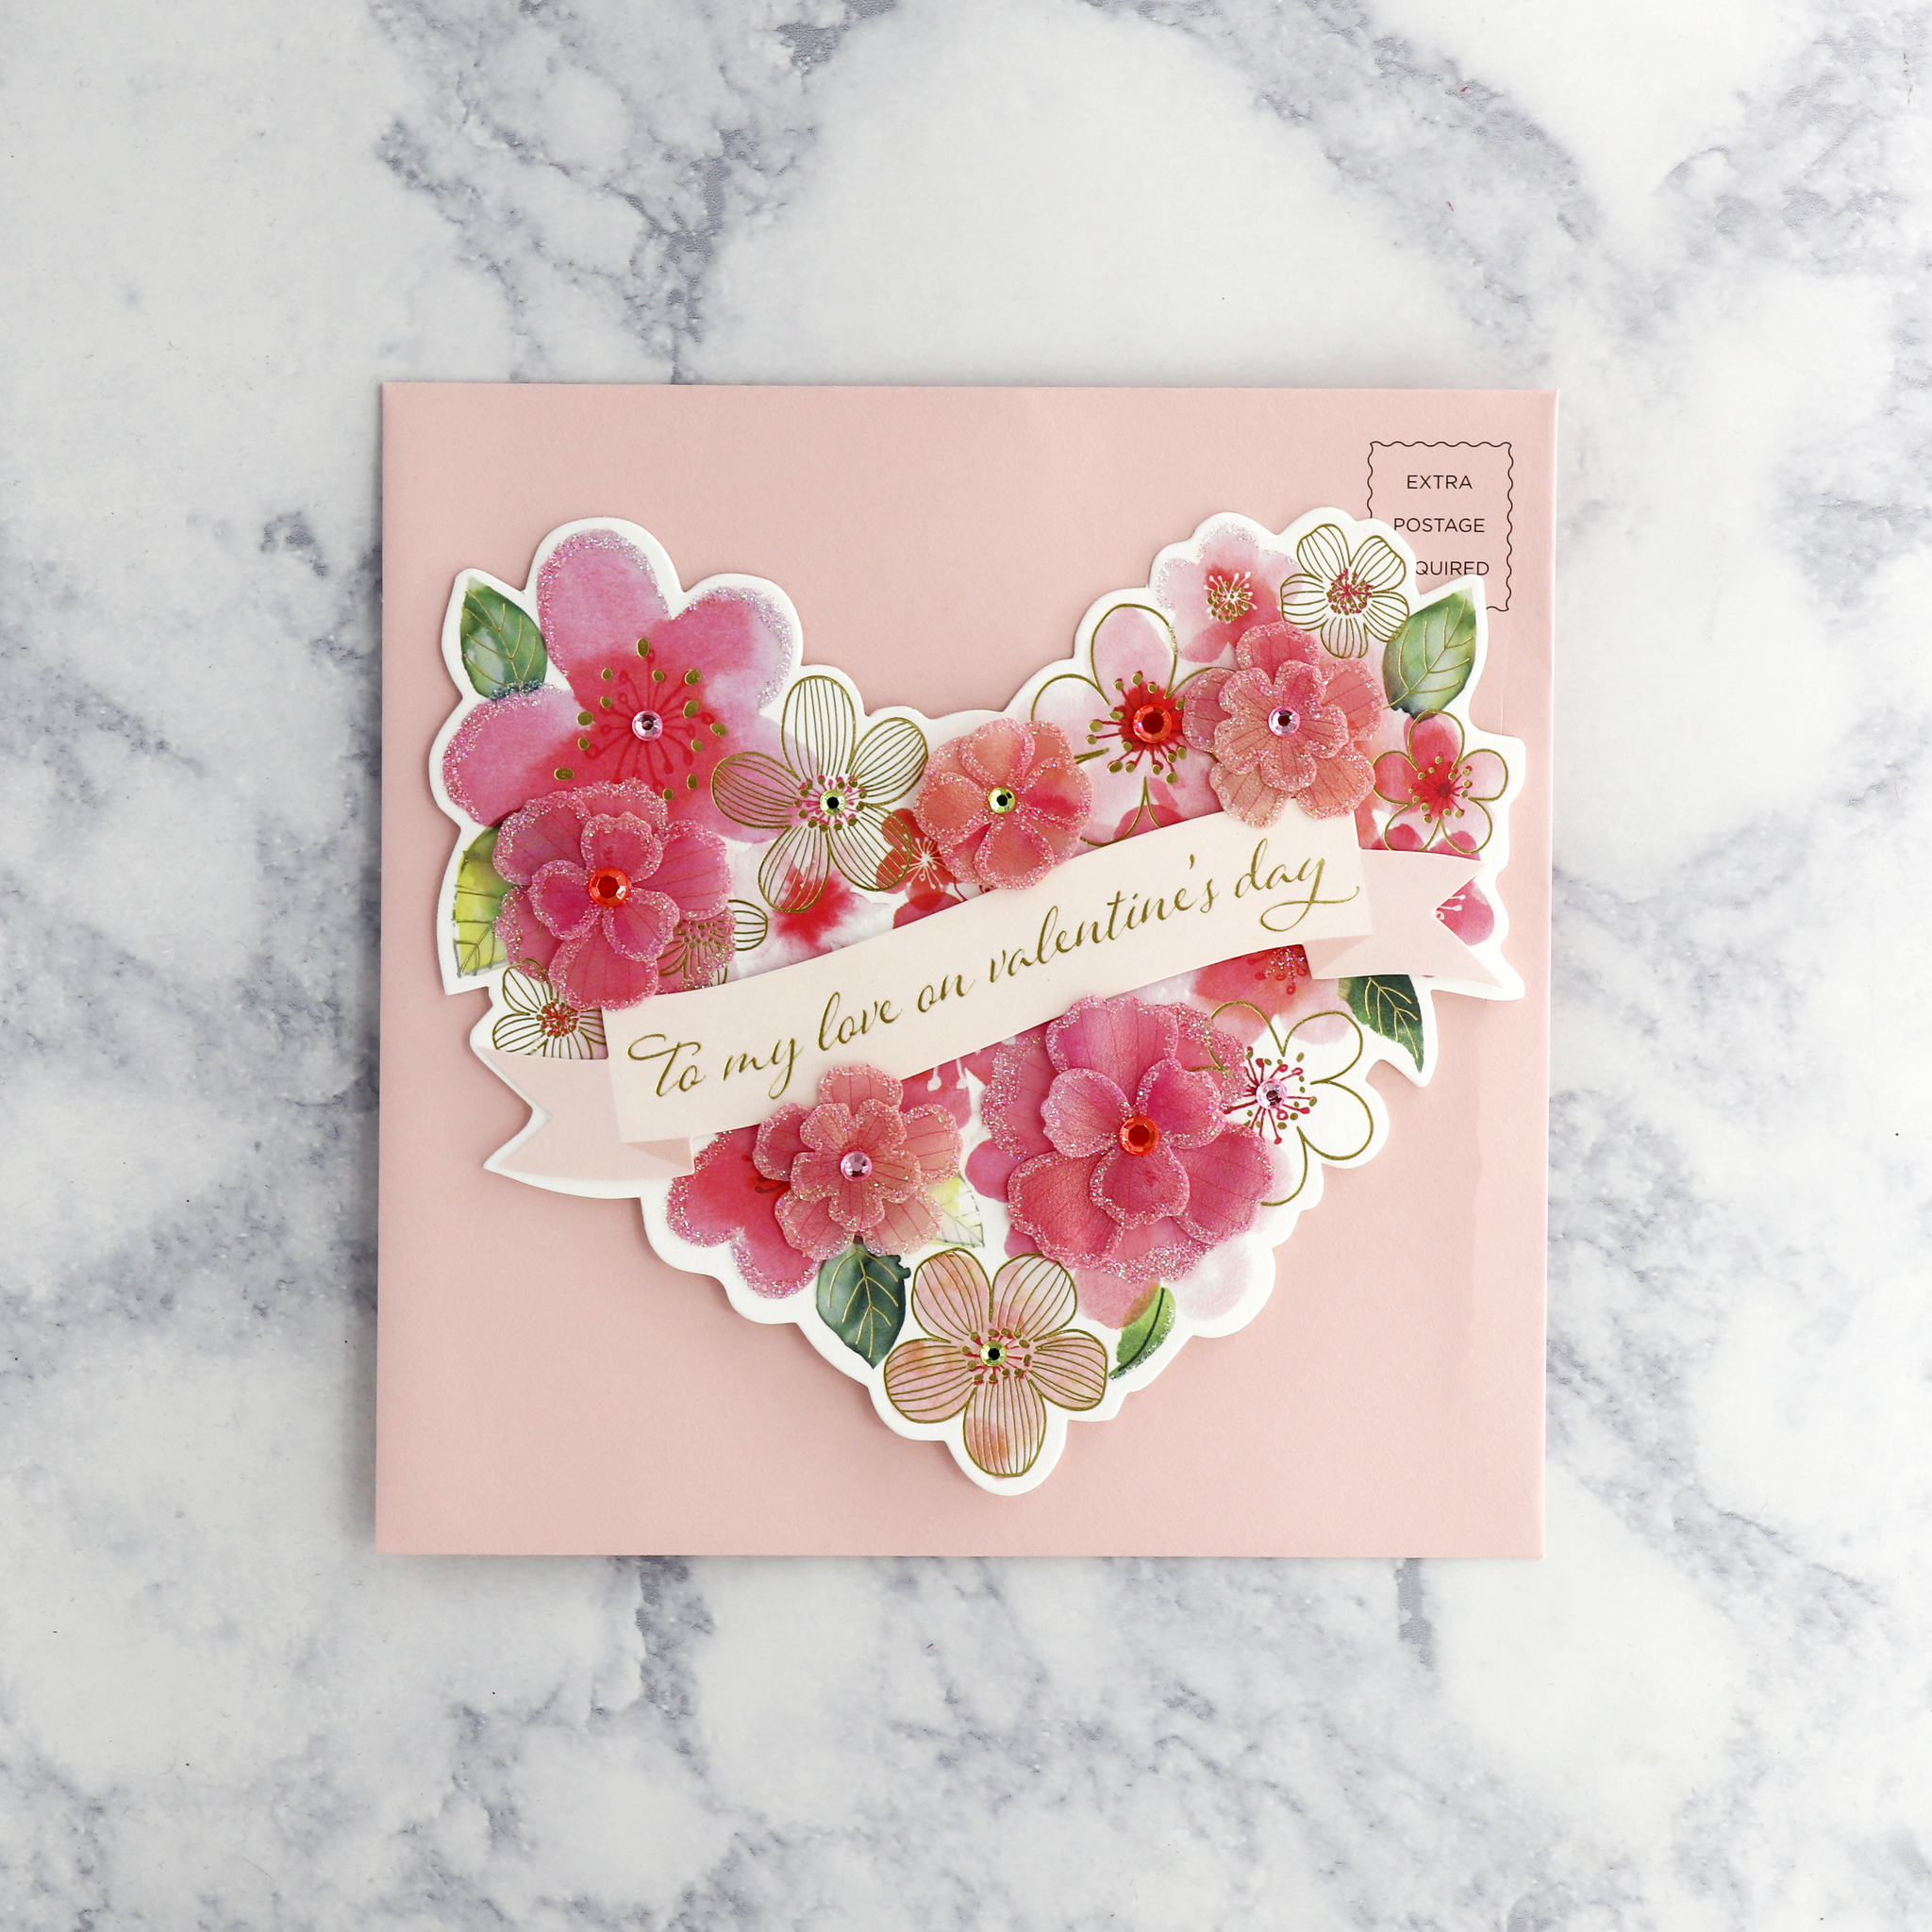 Die-Cut Watercolor Heart Valentine’s Day Card